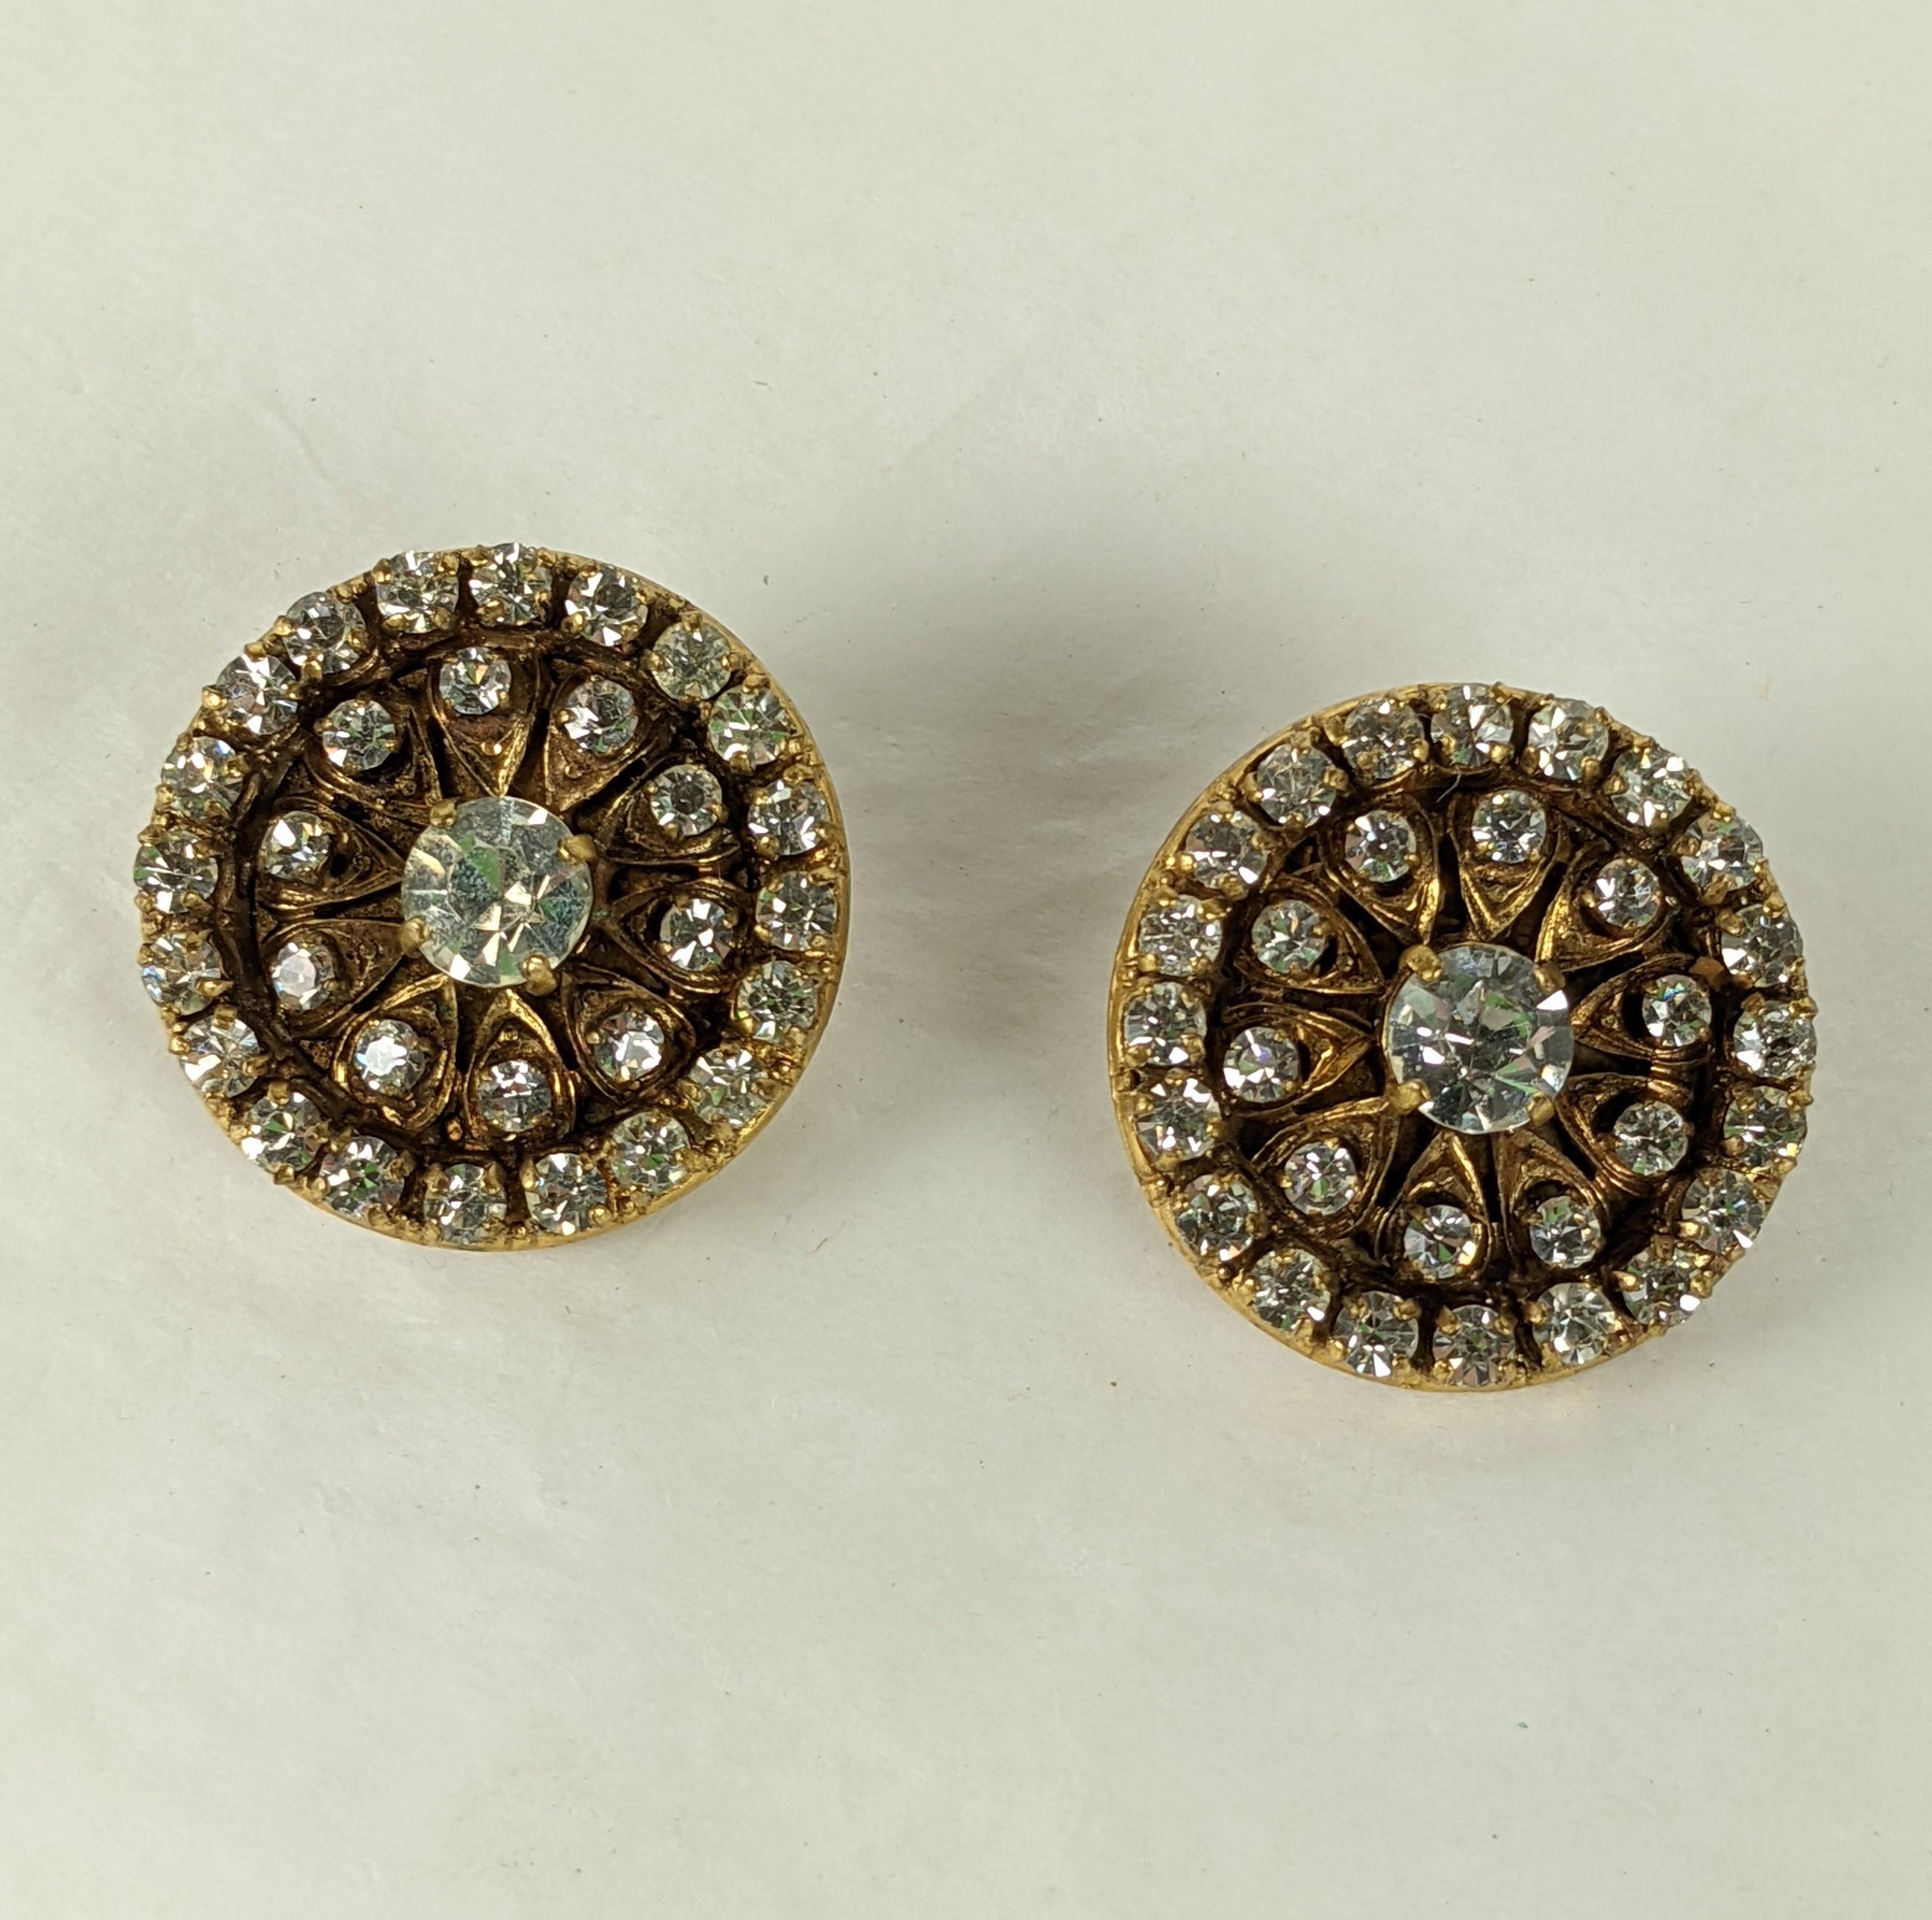 Chanel Pave Encrusted Earrings In Excellent Condition For Sale In New York, NY